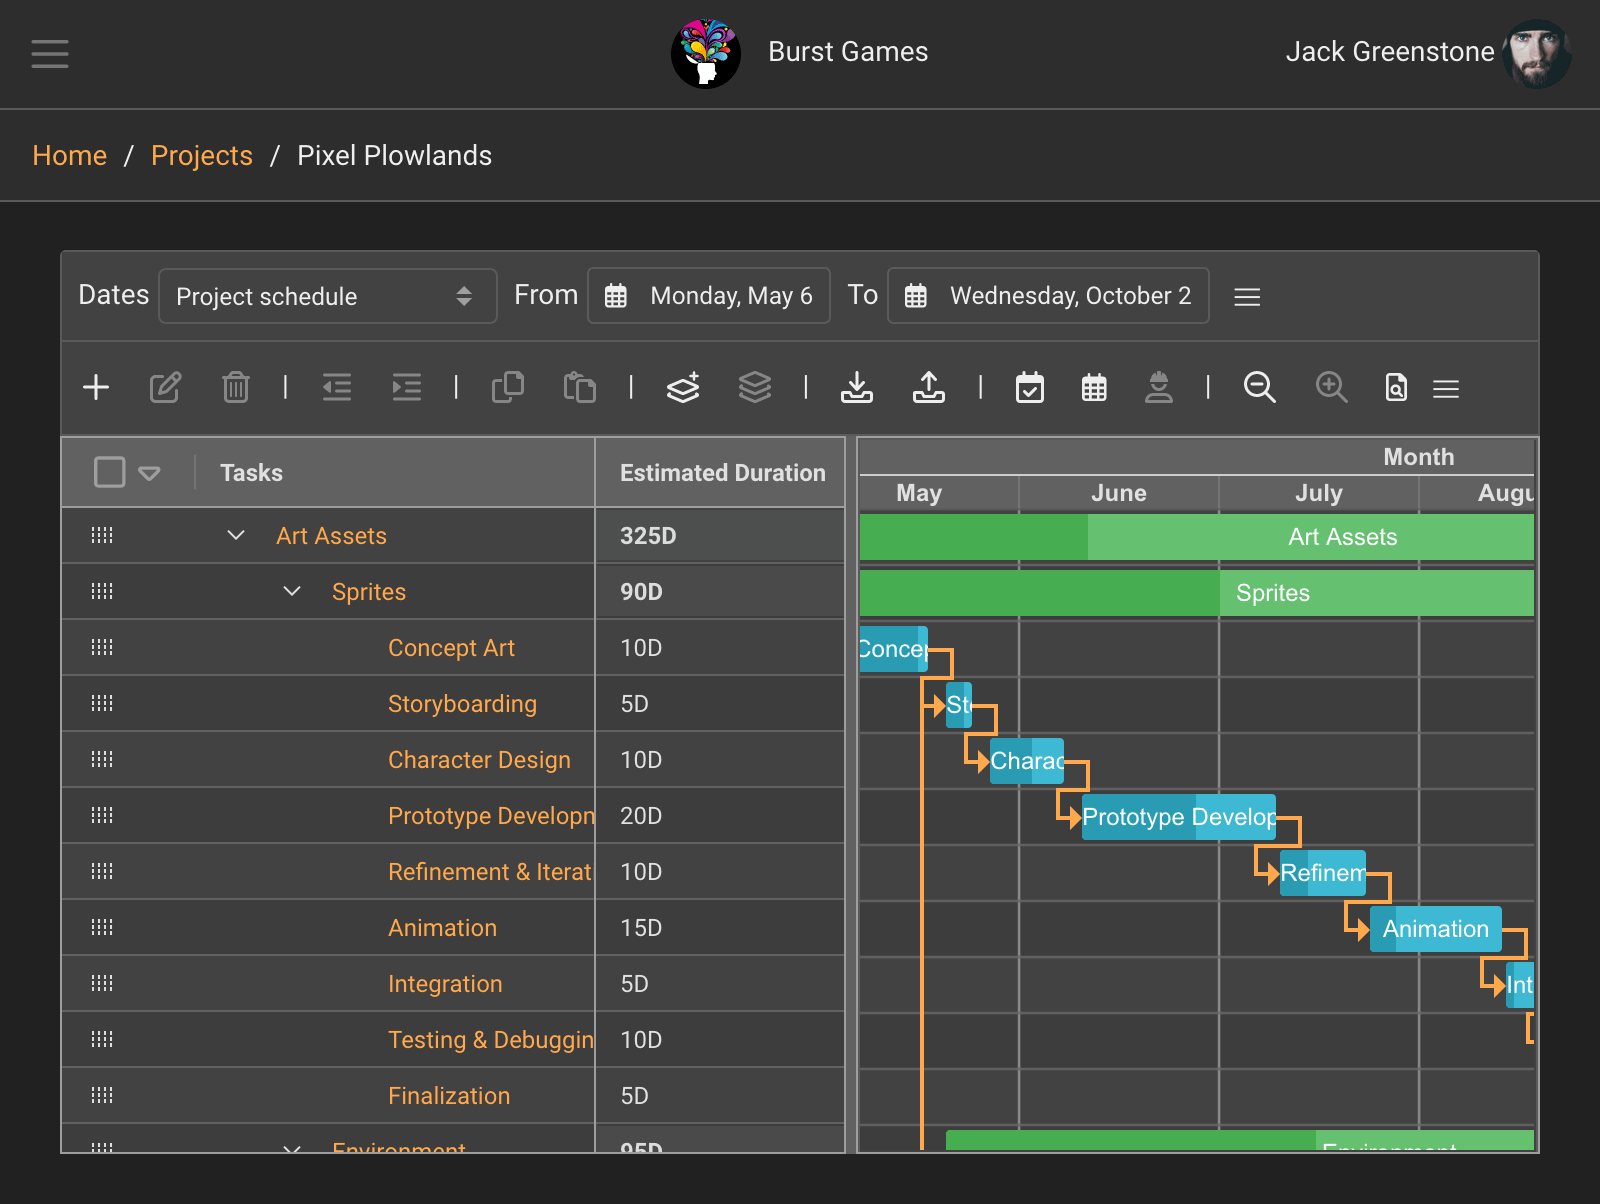 Projectal tracks the progress of your games project